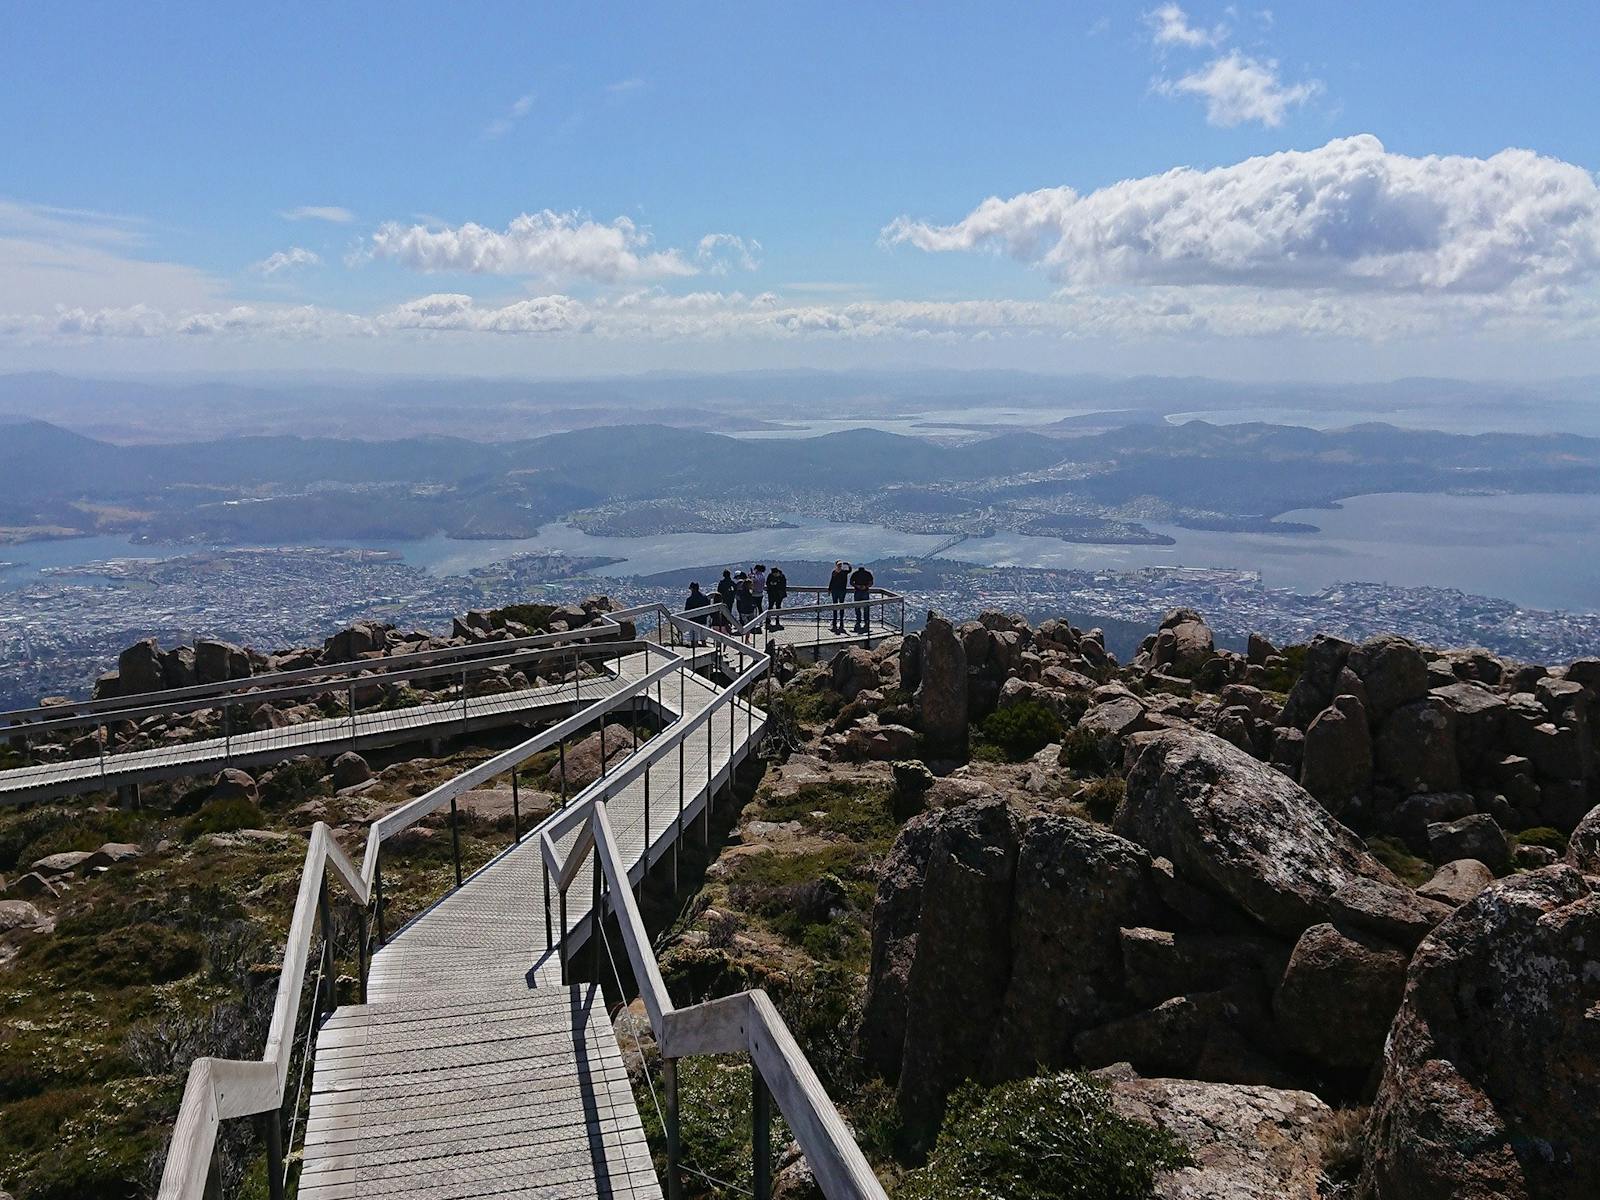 A small group of people enjoying the view over Hobart from a lookout  on kunanyi/Mt Wellington.